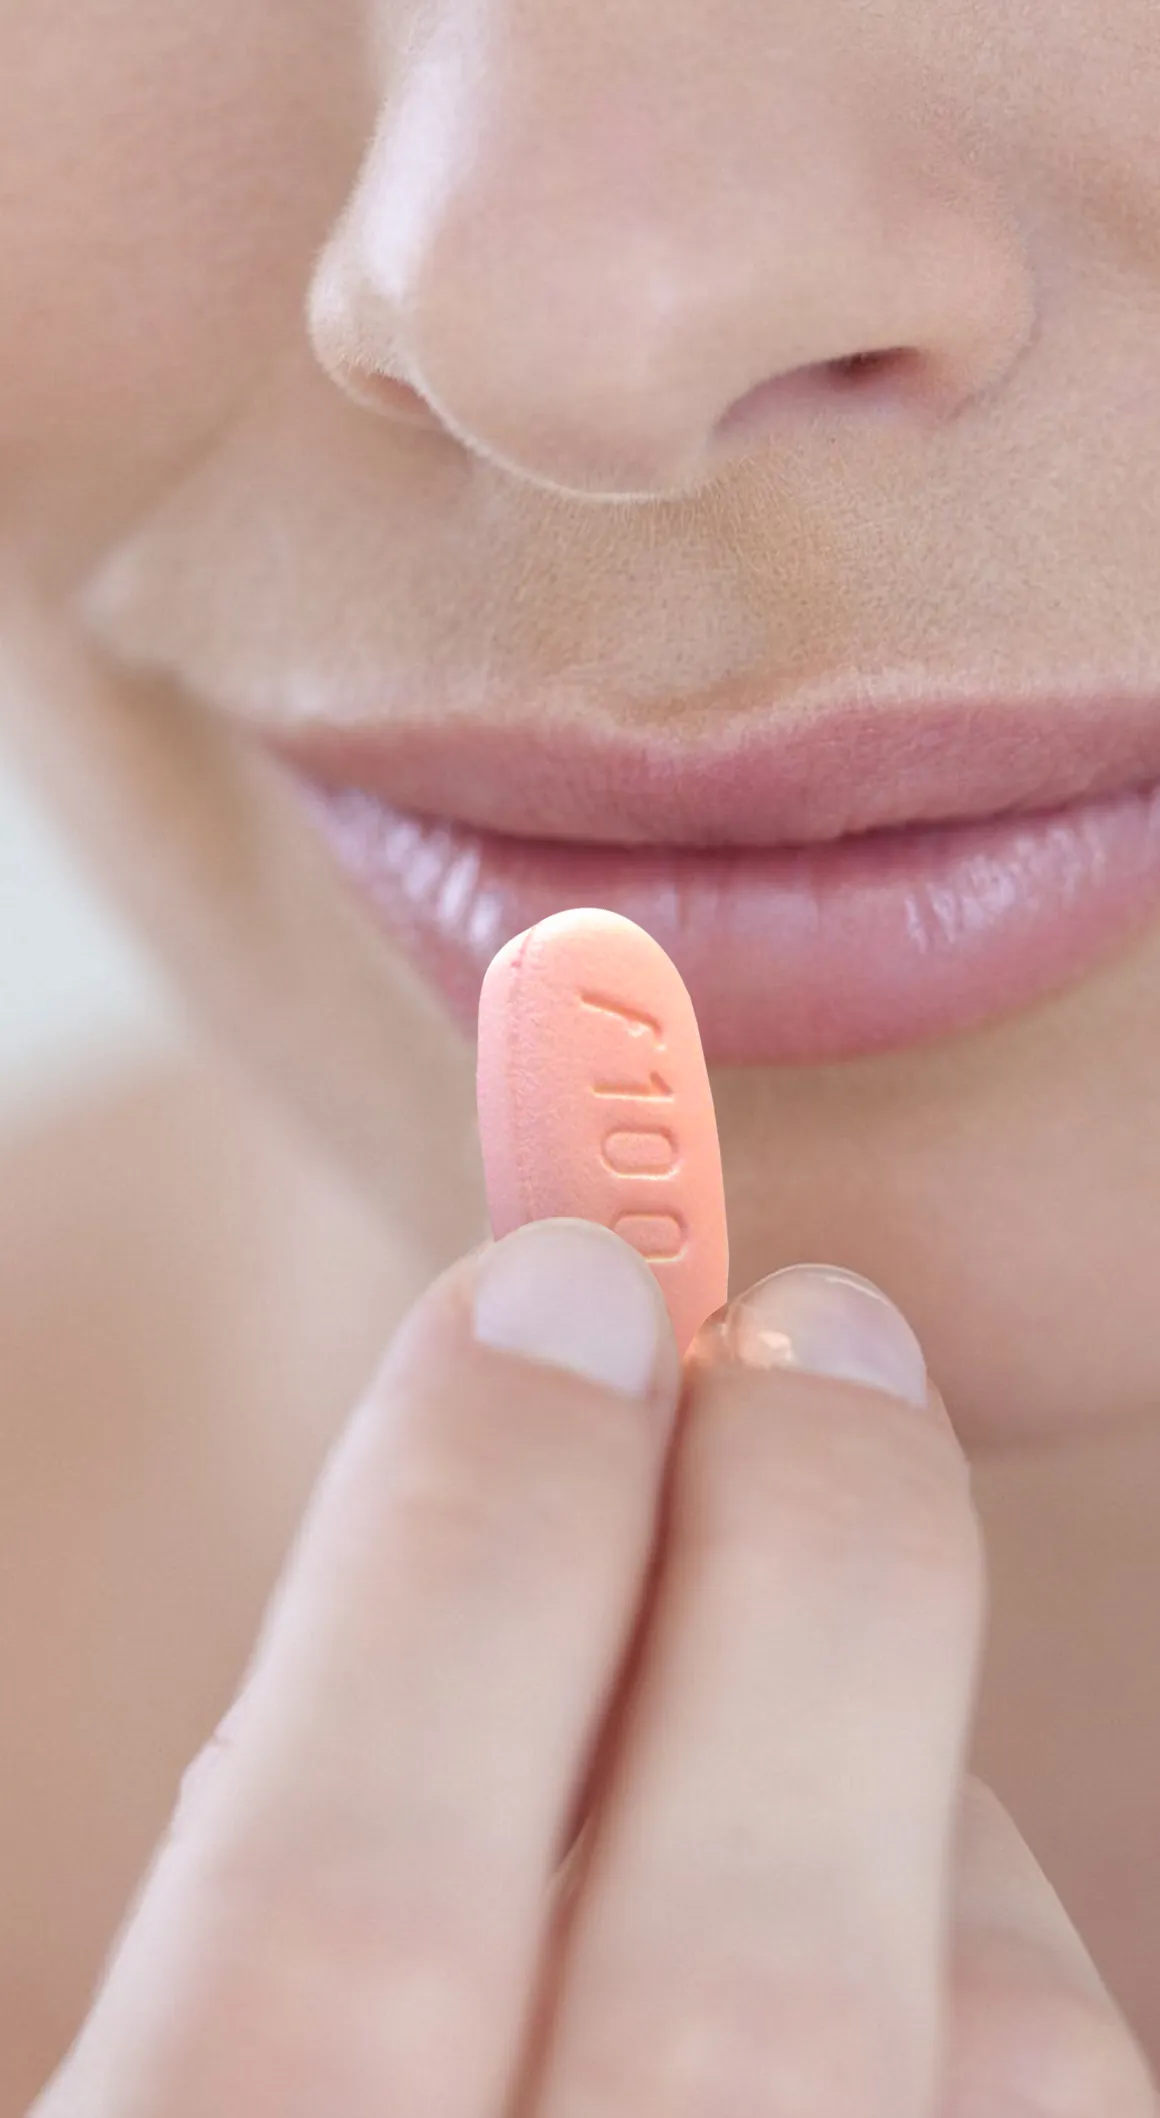 A Sexual Health Expert in Los Angeles holding a pink pill close to their lips, possibly about to take medication.